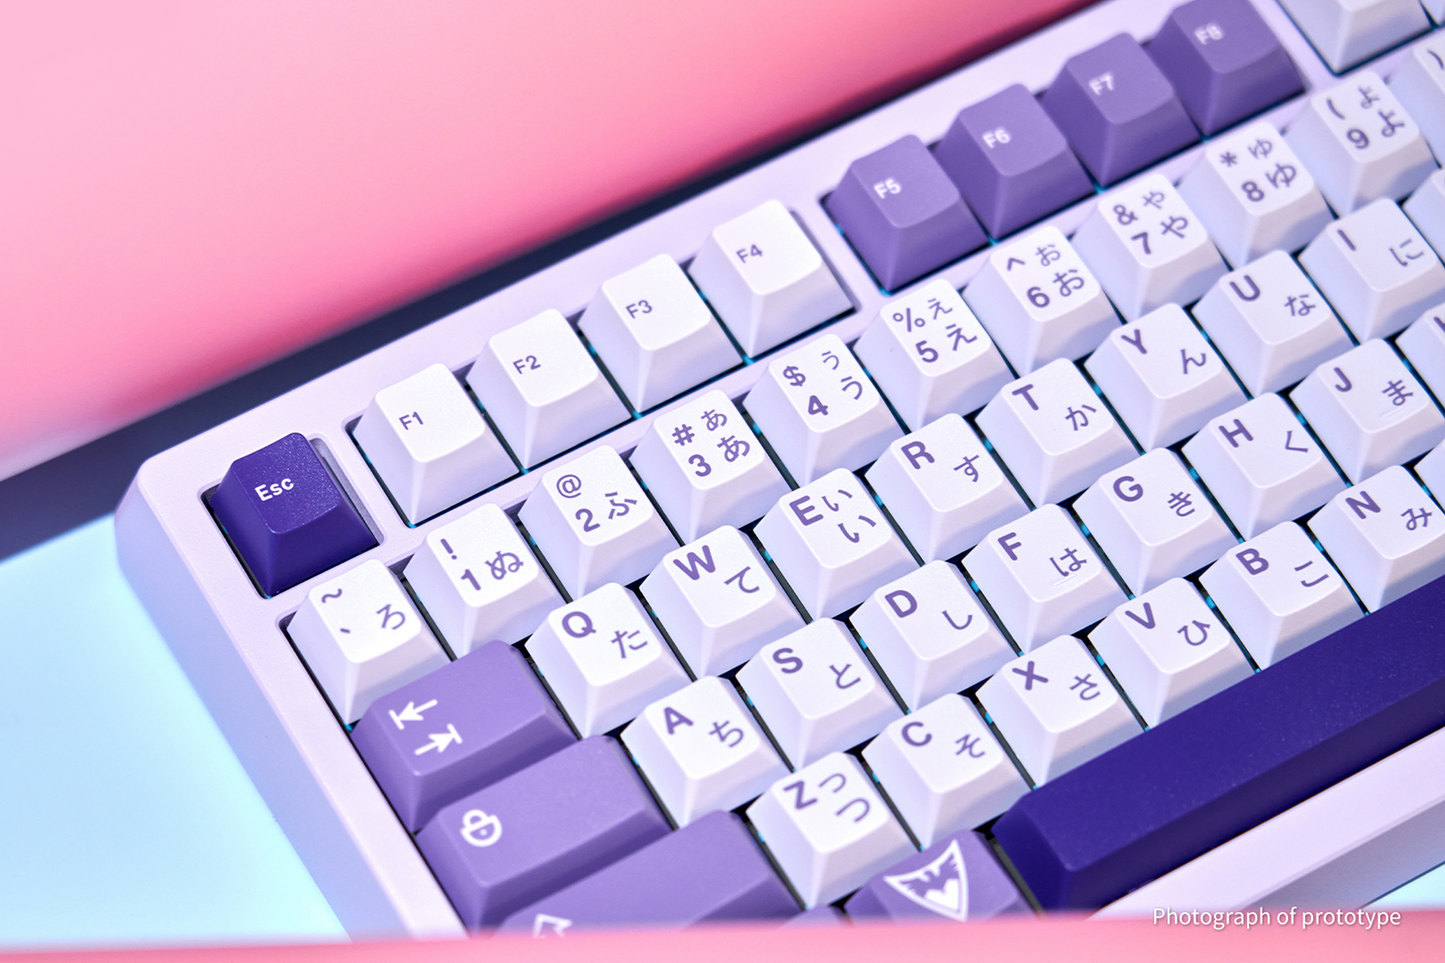 [Group-Buy] Meletrix Zoom75 Essential Edition (EE) - Barebones Keyboard Kit - Lilac [Air Shipping]